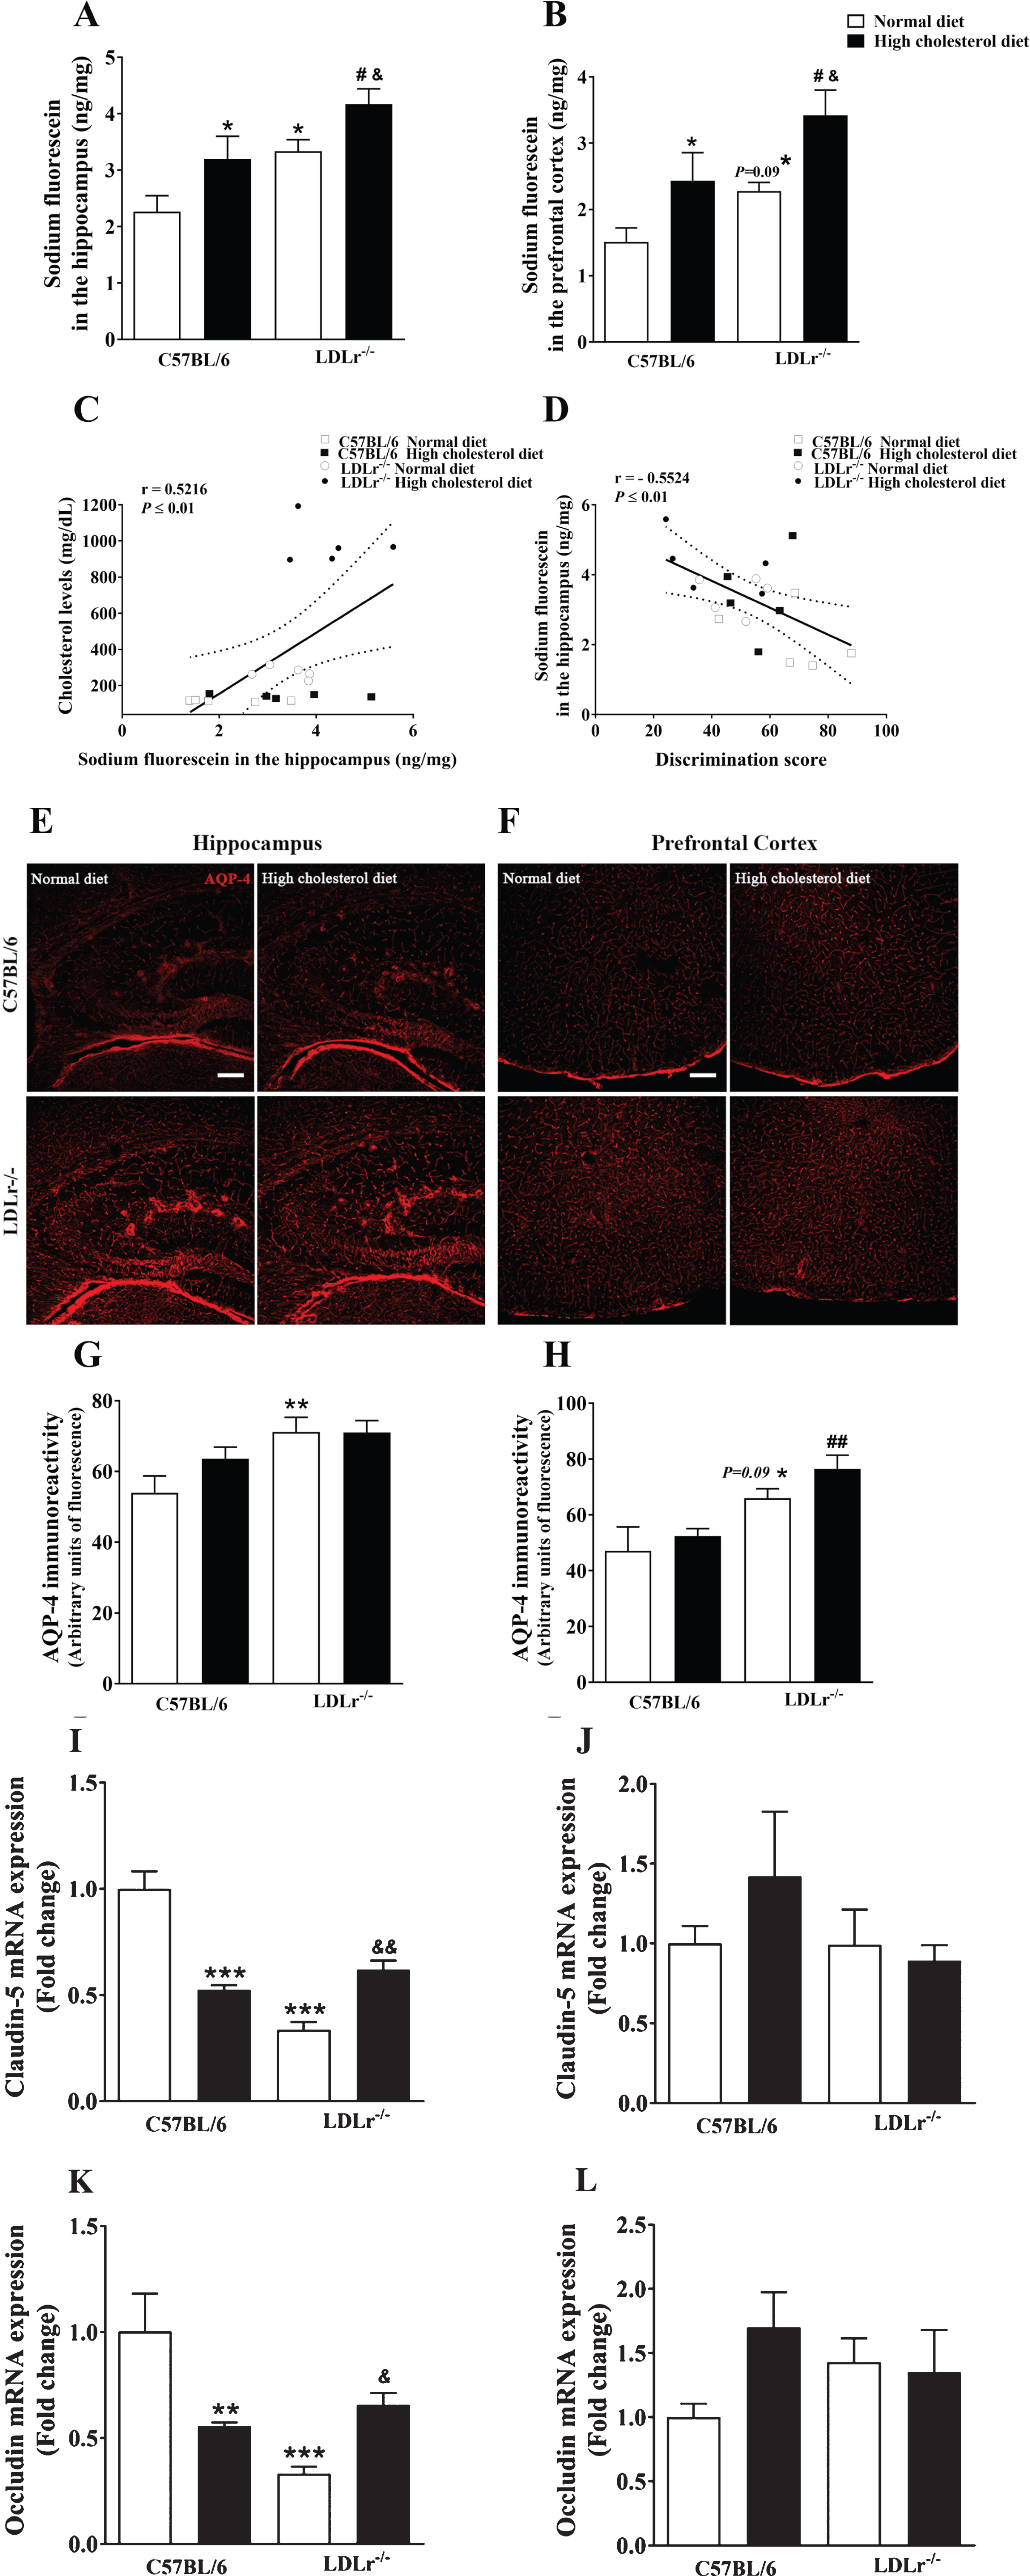 Effects of high cholesterol diet on blood-brain barrier (BBB) integrity of C57BL/6 wild-type and LDLr–/– mice. BBB permeability to sodium fluorescein in the (A) hippocampus and (B) prefrontal cortex of wild-type and LDLr–/– mice fed with normal or high cholesterol diet (n = 6–7). C) A significant correlation between cholesterol levels and permeability to sodium fluorescein in the hippocampus. D) A Significant correlation between BBB permeability to sodium fluorescein in the hippocampus and discriminatory score (Pearson’s correlations). Representative images of aquaporin-4 (AQP-4) content immunofluorescence analysis in the (E) hippocampus and (F) prefrontal cortex of the animals. The serial stack of images of AQP-4 (red) immunofluorescence staining were obtained with a Leica DMI6000 B confocal microscope. Scale bars, 150μm. Quantitation of AQP-4 immunoreactivity in the (G) hippocampus and (H) prefrontal cortex (n = 4–5). Gene expression of tight junction’s protein, claudin-5 and occludin, in mice’s (I and K, respectively) hippocampus and (J and L, respectively) prefrontal cortex (n = 5). Data are expressed as the mean±SEM. *p < 0.05, **p < 0.01, and ***p < 0.001 compared with C57BL/6 mice fed with a normal diet, #p < 0.05 and ##p < 0.01 compared with C57BL/6 mice fed with a high cholesterol diet, and &p < 0.05 and &&p < 0.01 compared with LDLr–/– mice fed with a normal diet (Two-way ANOVA followed by Duncan post-hoc test).